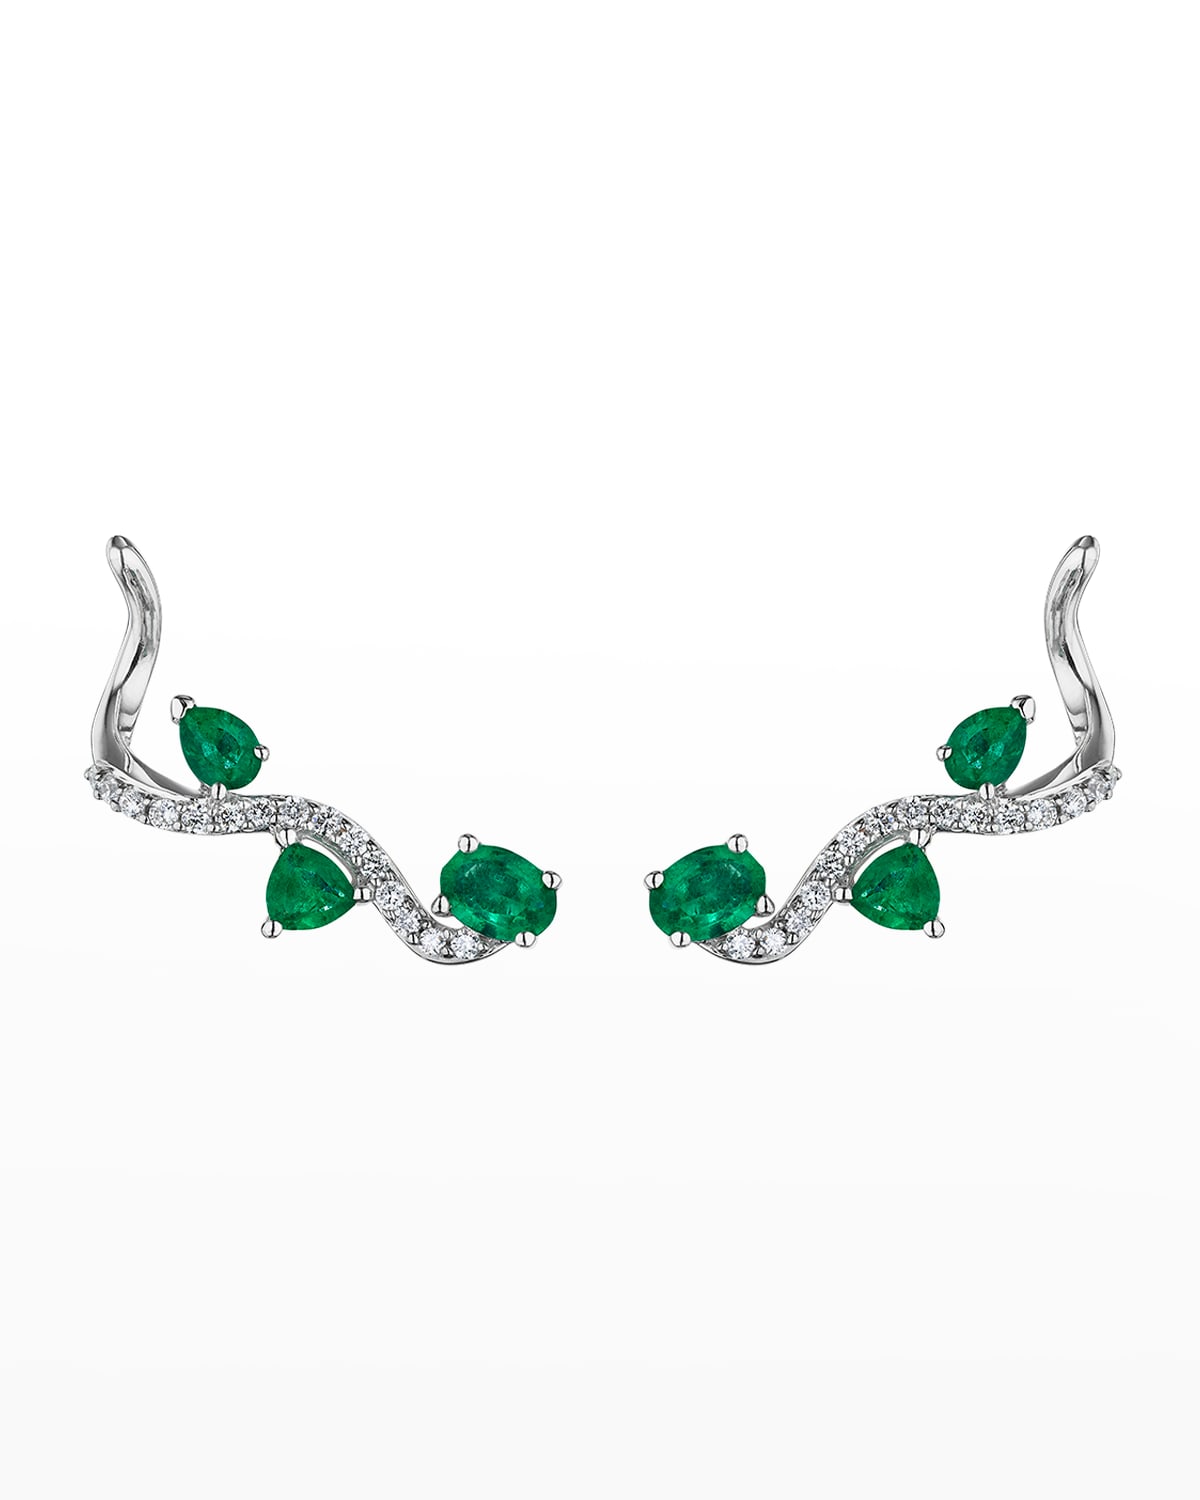 Hueb Mirage White Gold Earrings With Diamonds And Emeralds